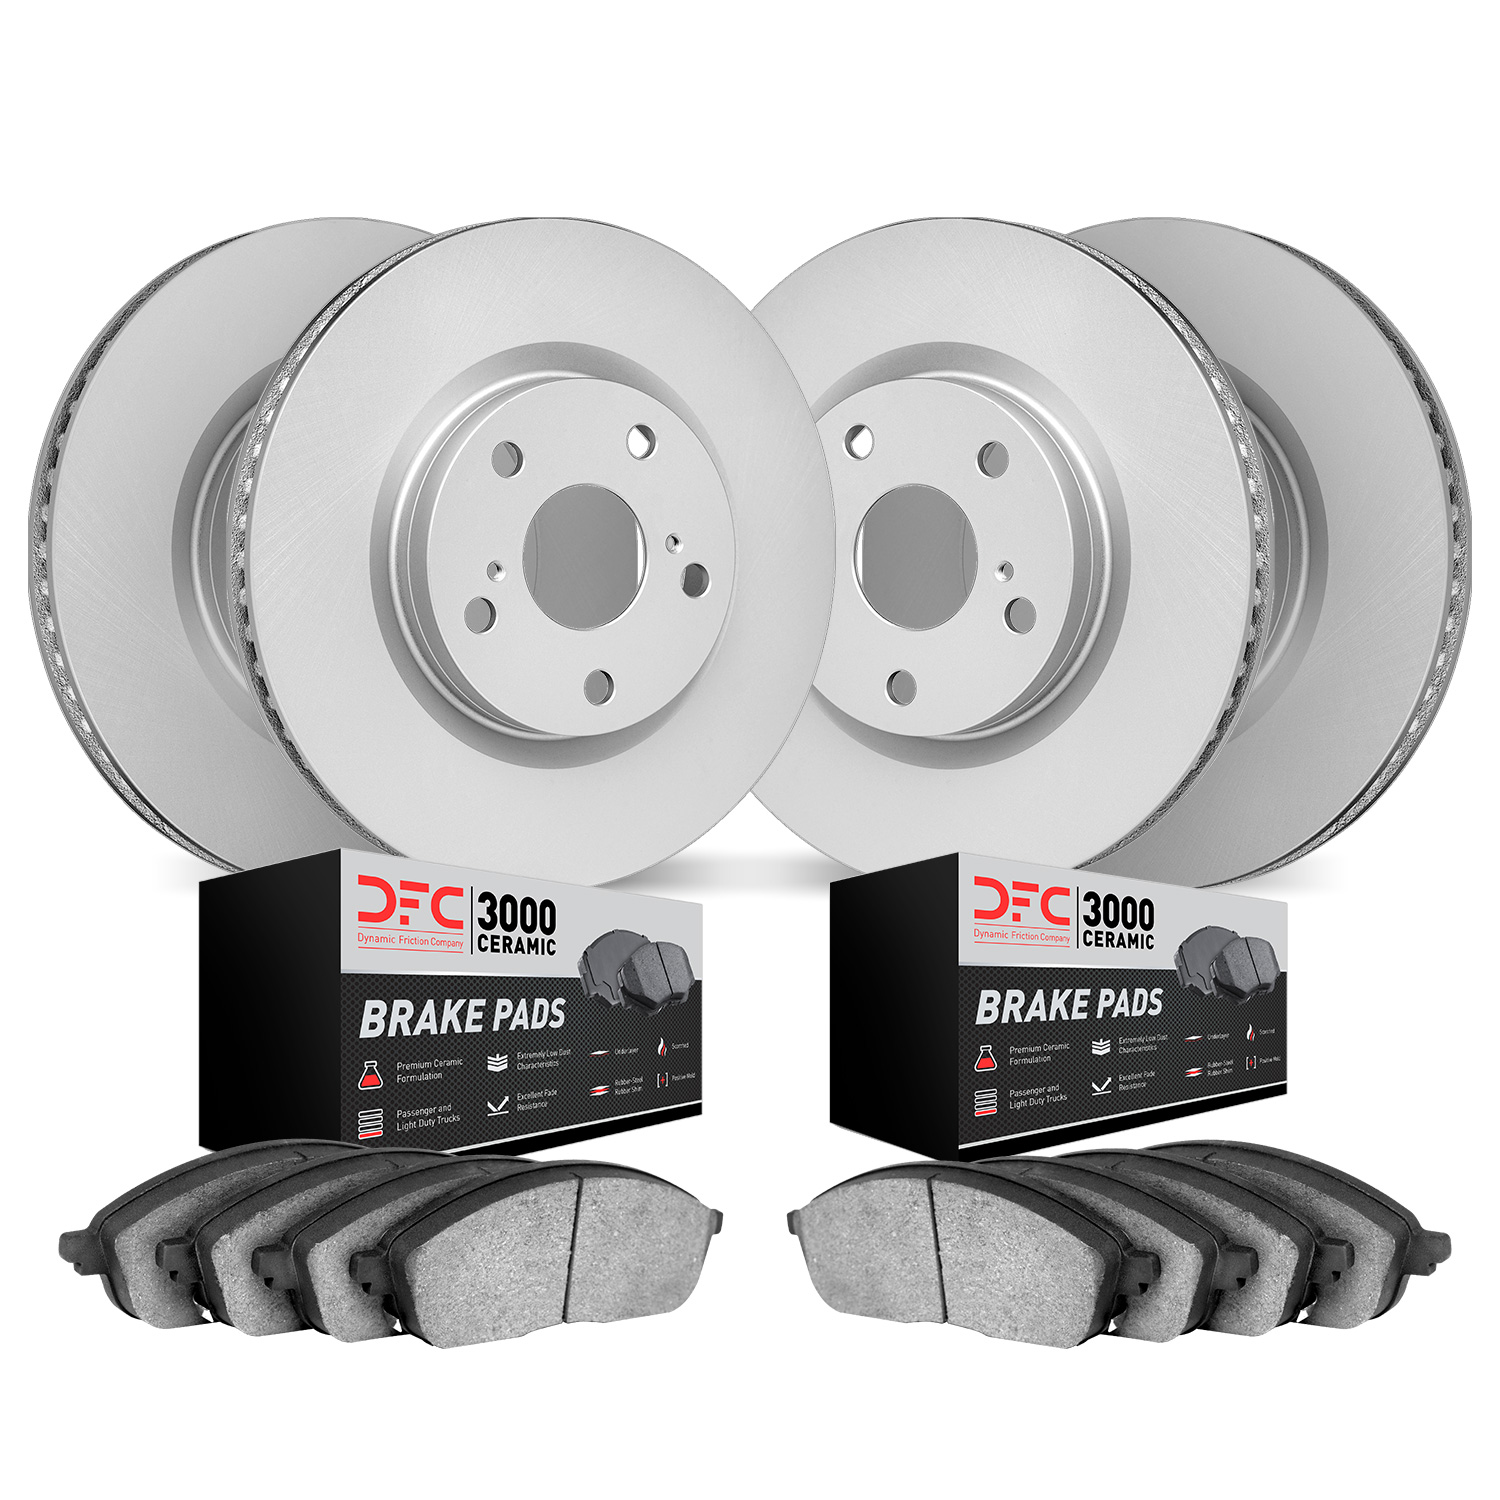 4304-31048 Geospec Brake Rotors with 3000-Series Ceramic Brake Pads Kit, 2007-2010 BMW, Position: Front and Rear